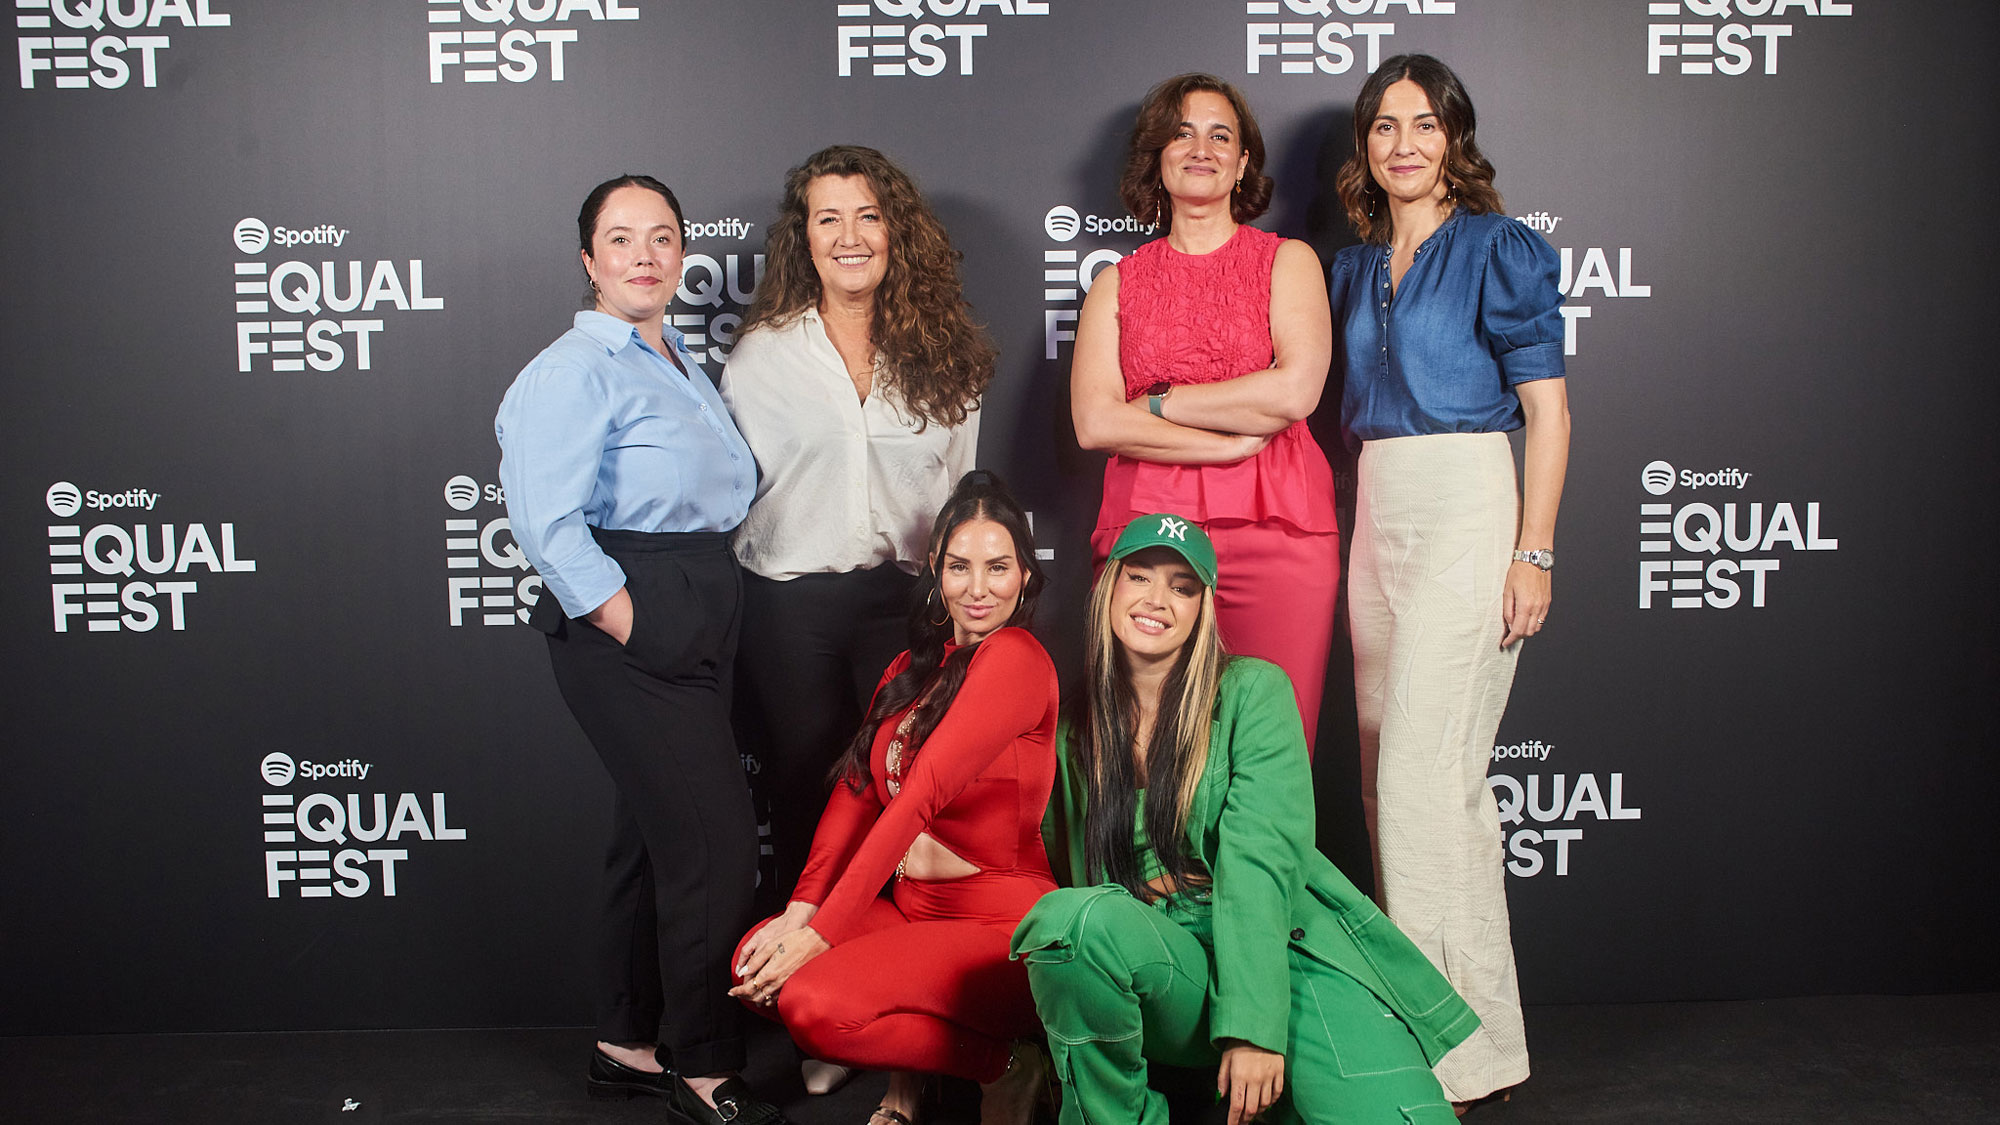 Equal fest festival mujeres spotify